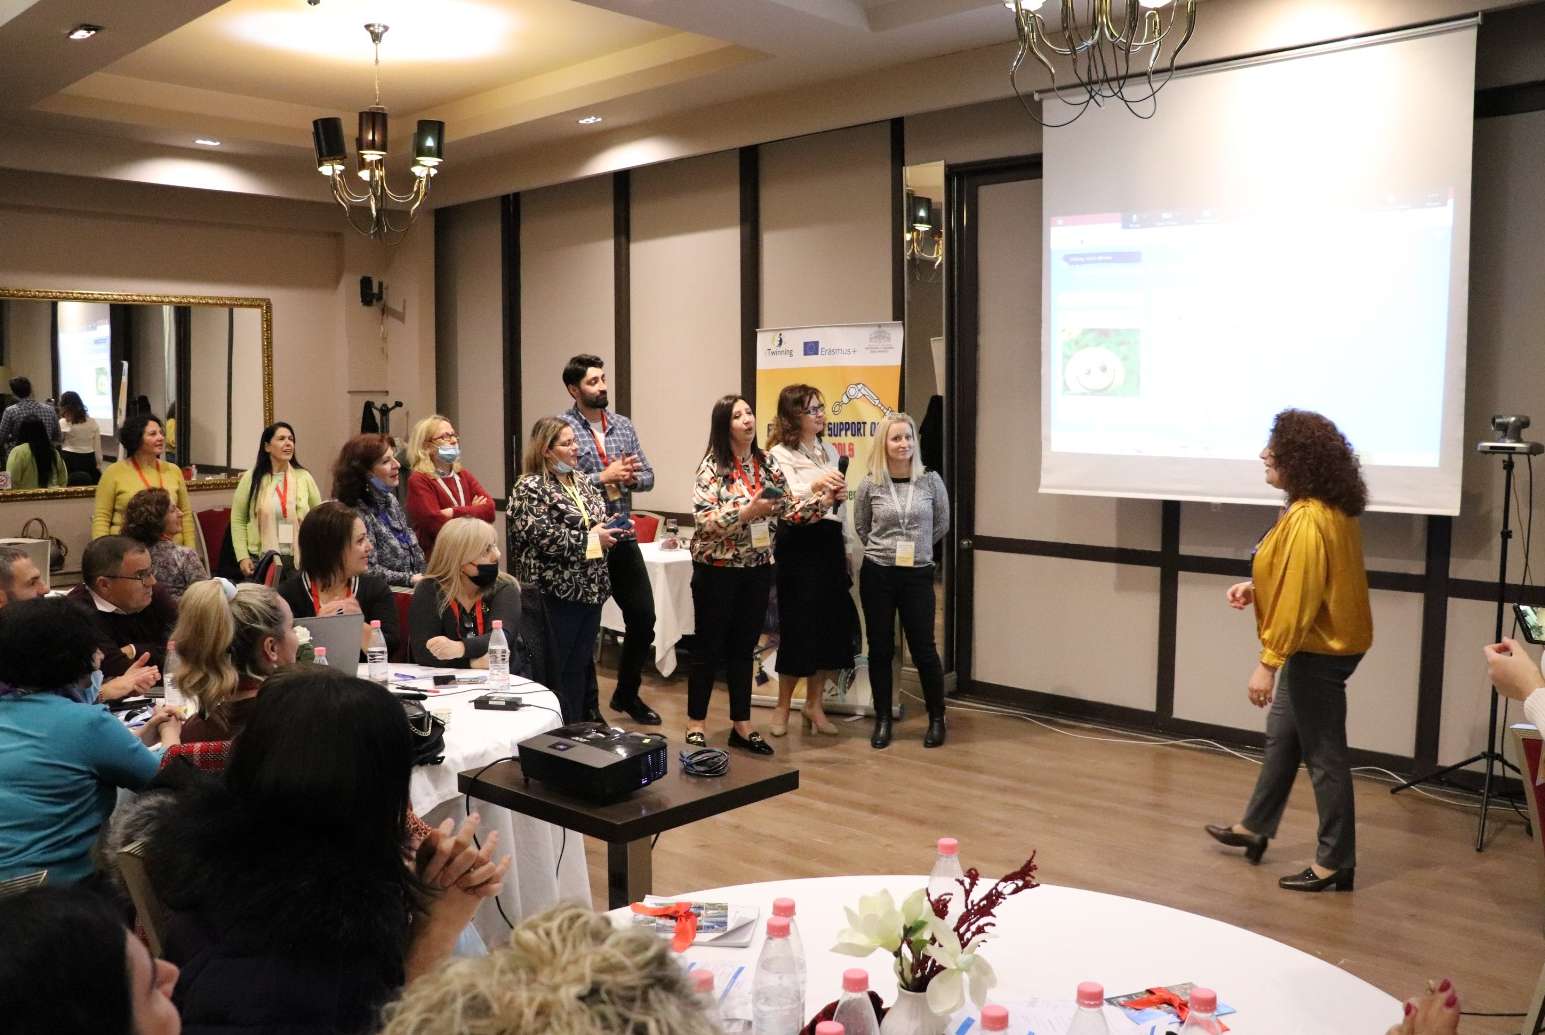 In the frame of eTwinning the competition for participation in local and foreign international  events has been launched.